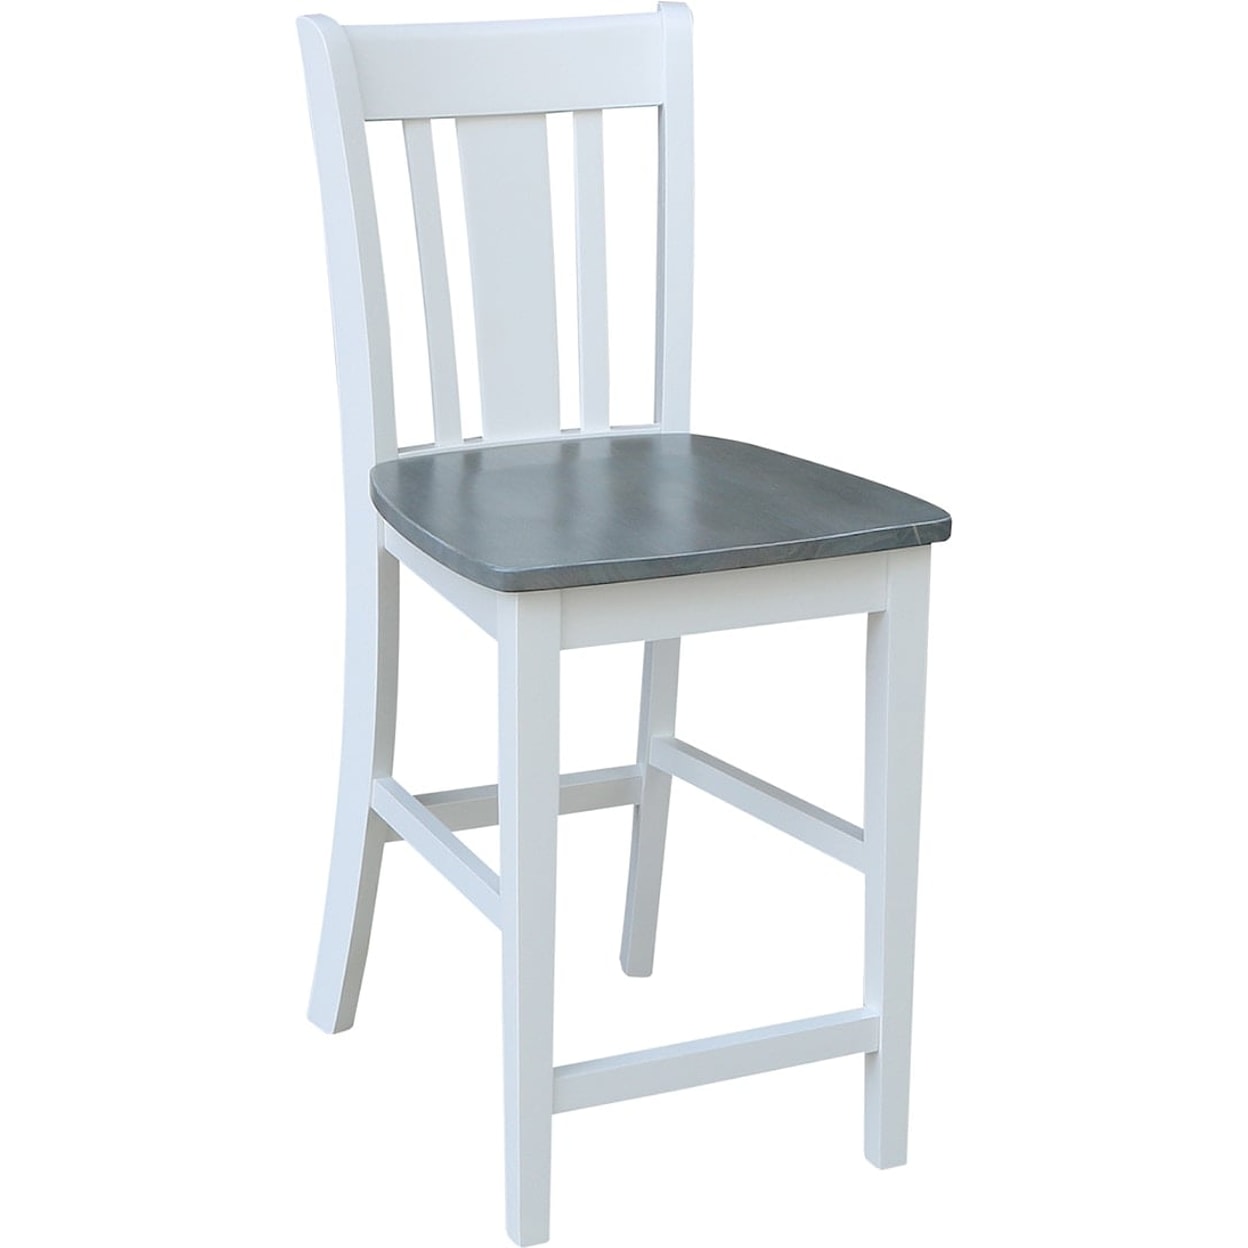 John Thomas Dining Essentials Counter Stool in Heather Gray / White